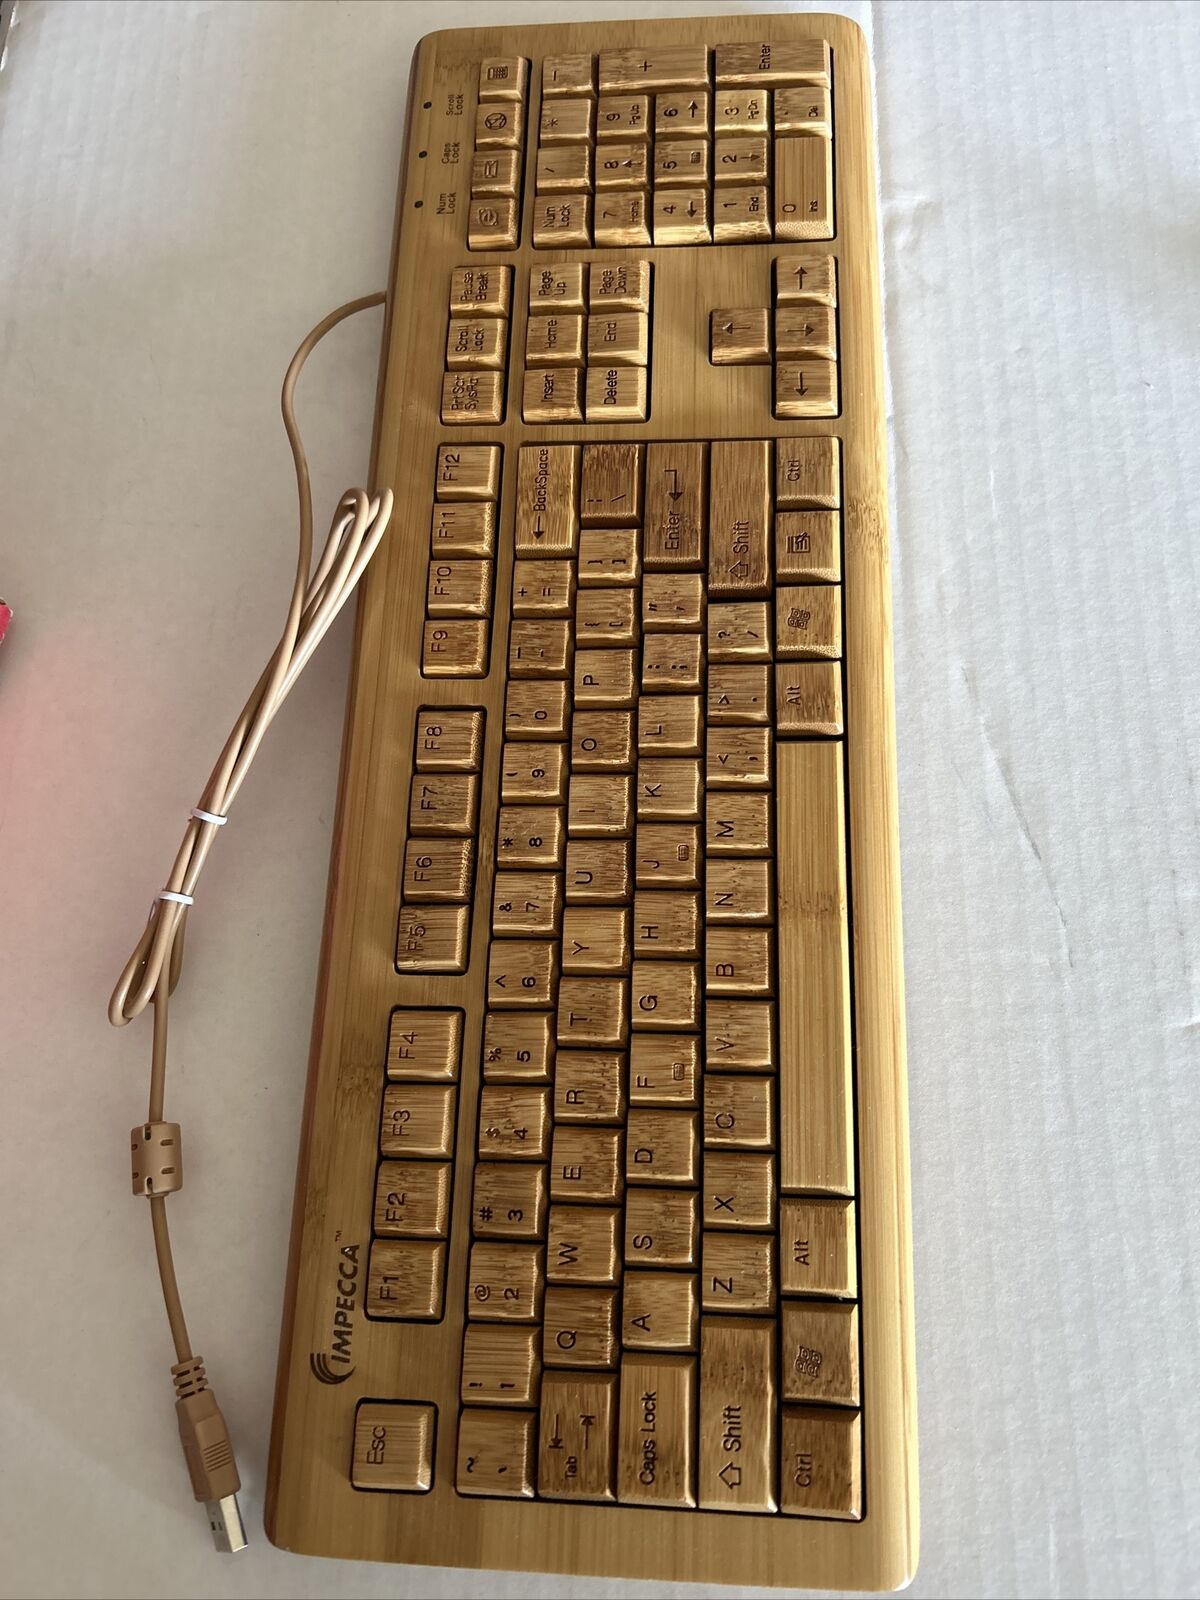 Impecca KBB500 Bamboo USB Keyboard Very Nice Condition